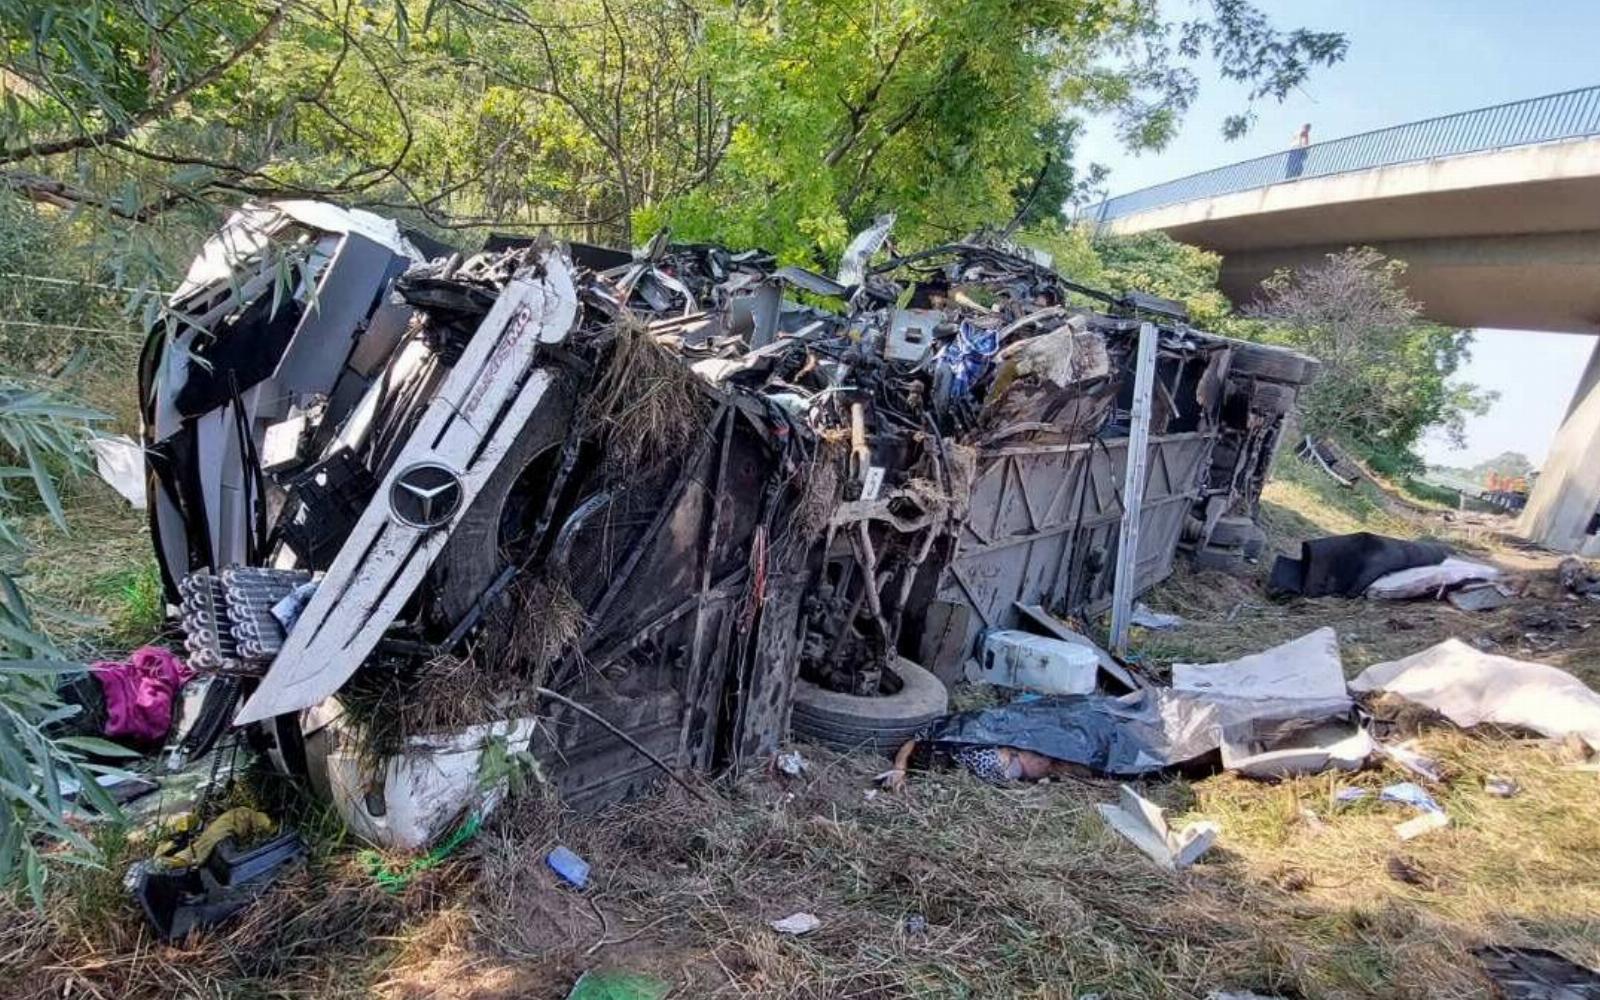 Watch: Eight Killed in M7 Bus Crash in Hungary